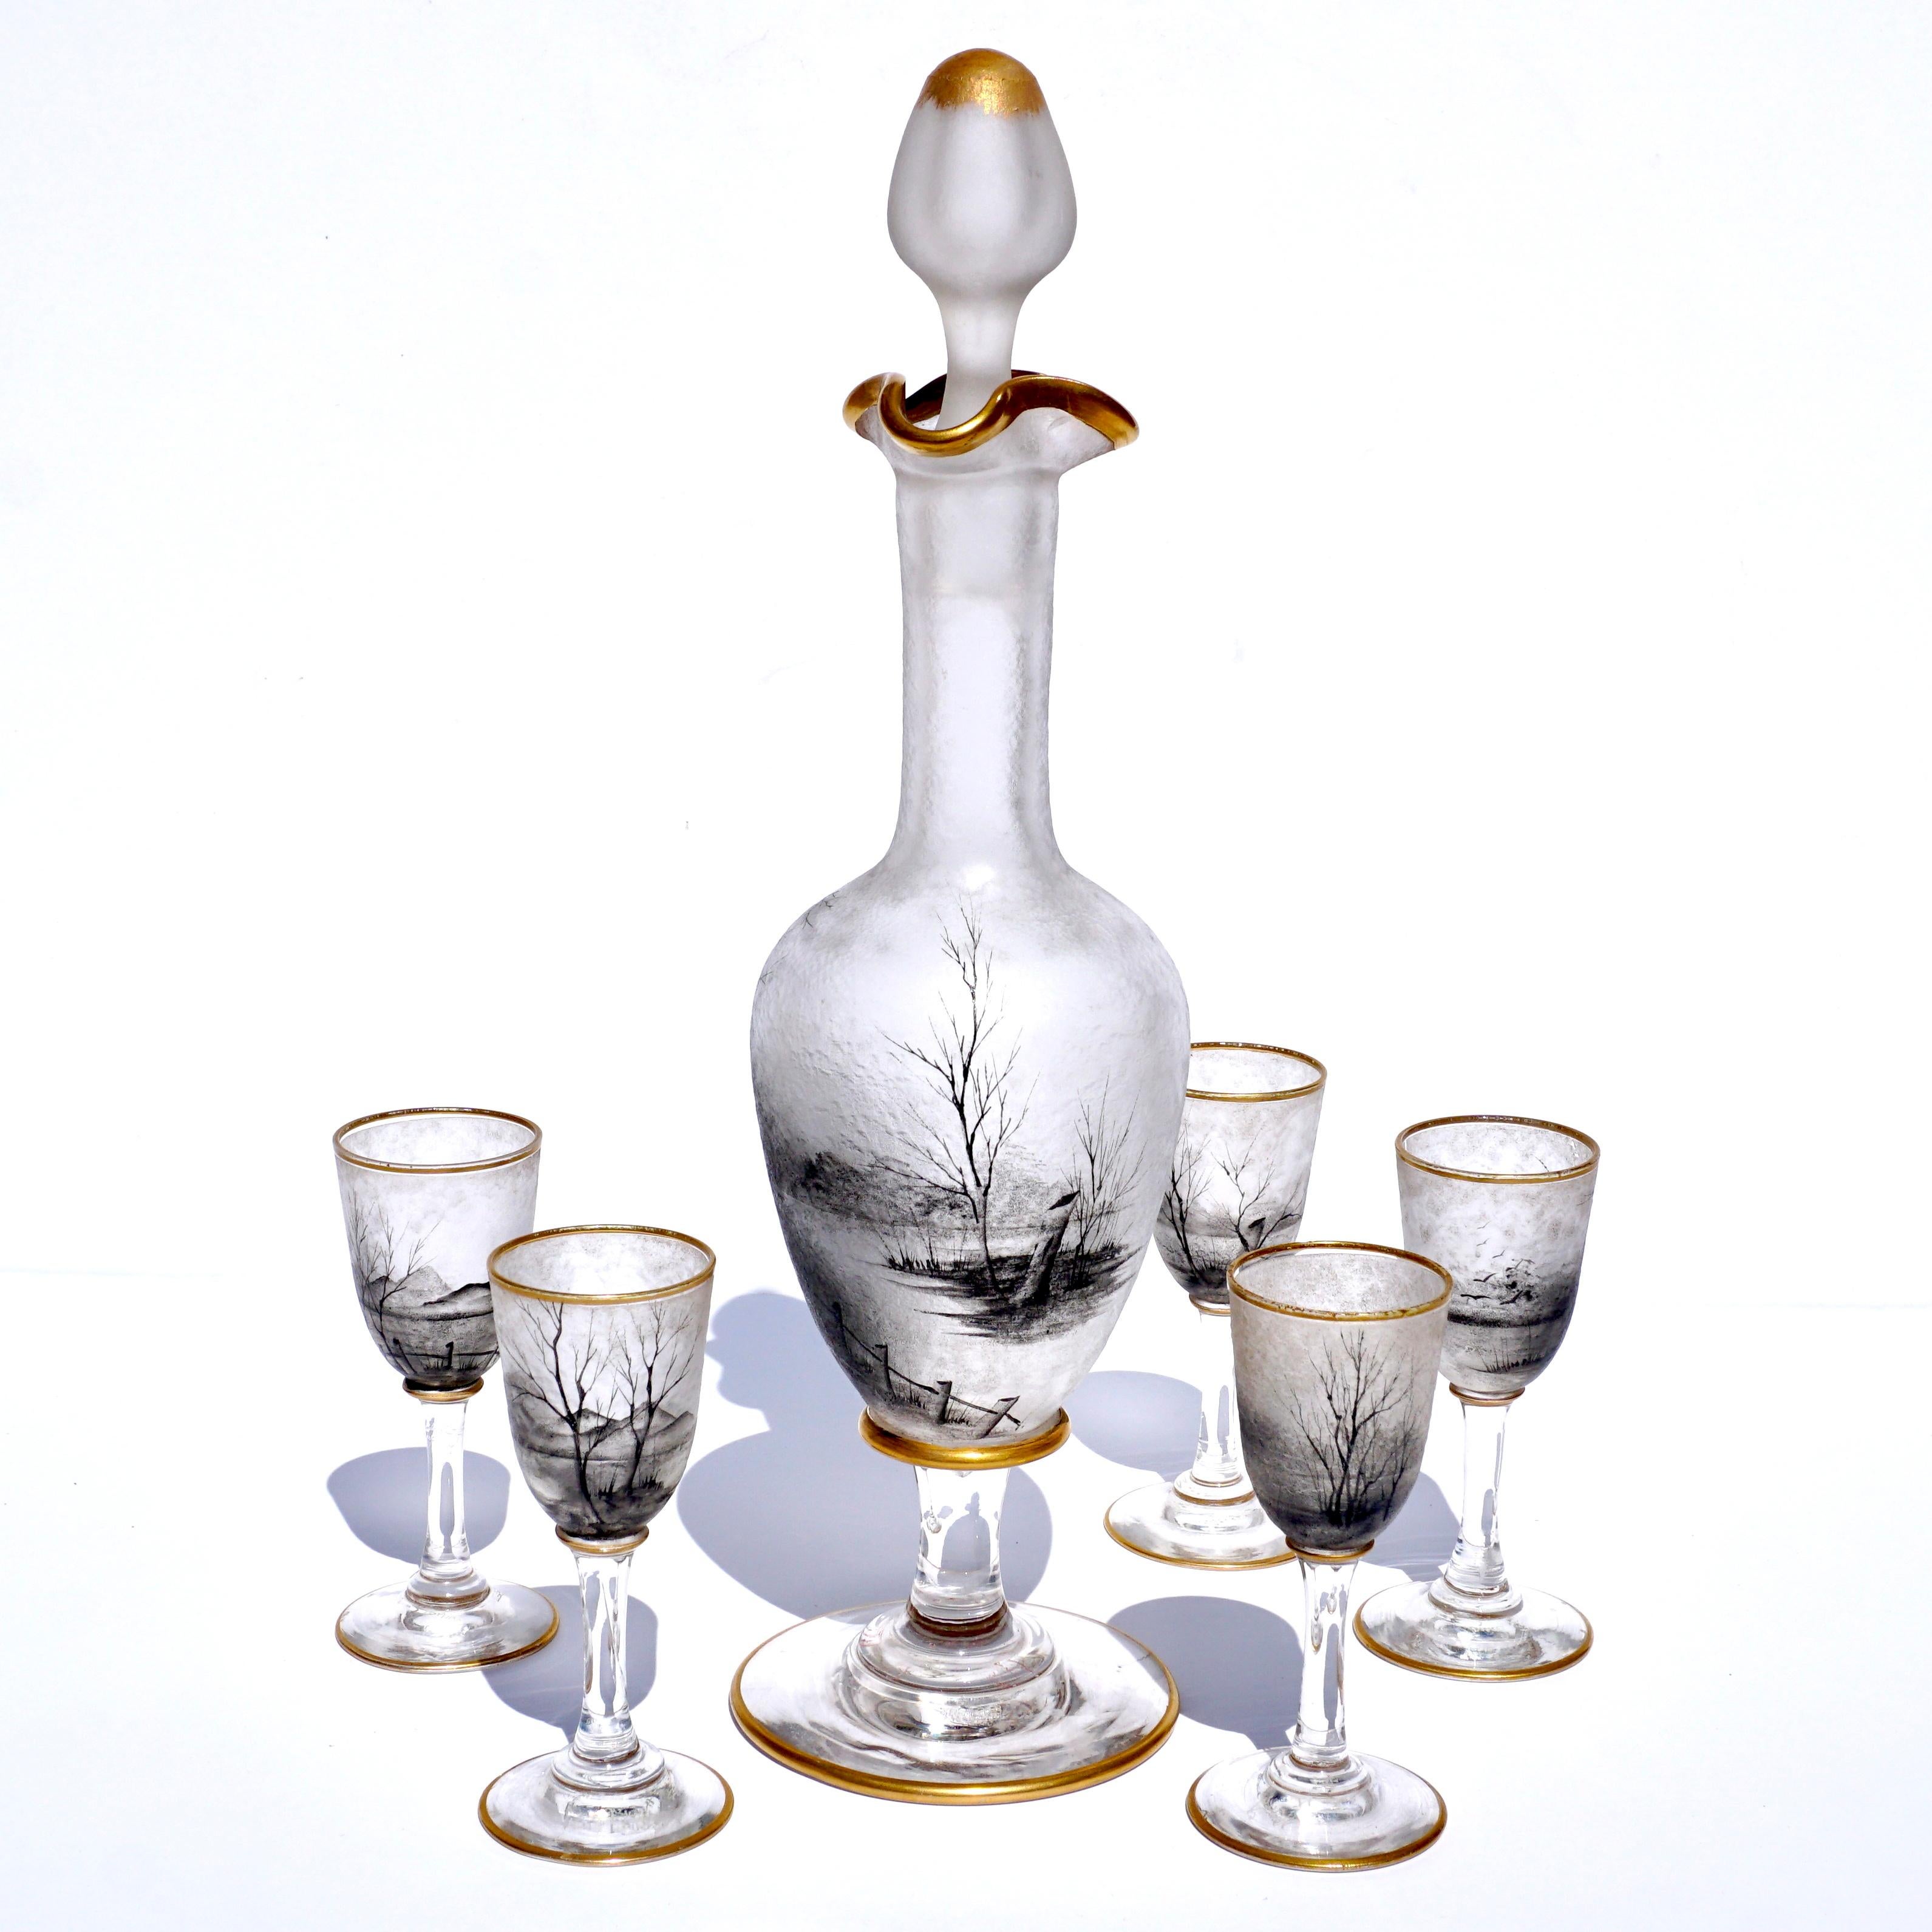 A spectacular Art Nouveau cordial set signed Daum Nancy with Cross of Lorraine. French Cameo Art Glass Frosted with white background. Acid etched with black enamel scenic decor consisting of farm houses, meadows and trees. Gold gilt trim on upper